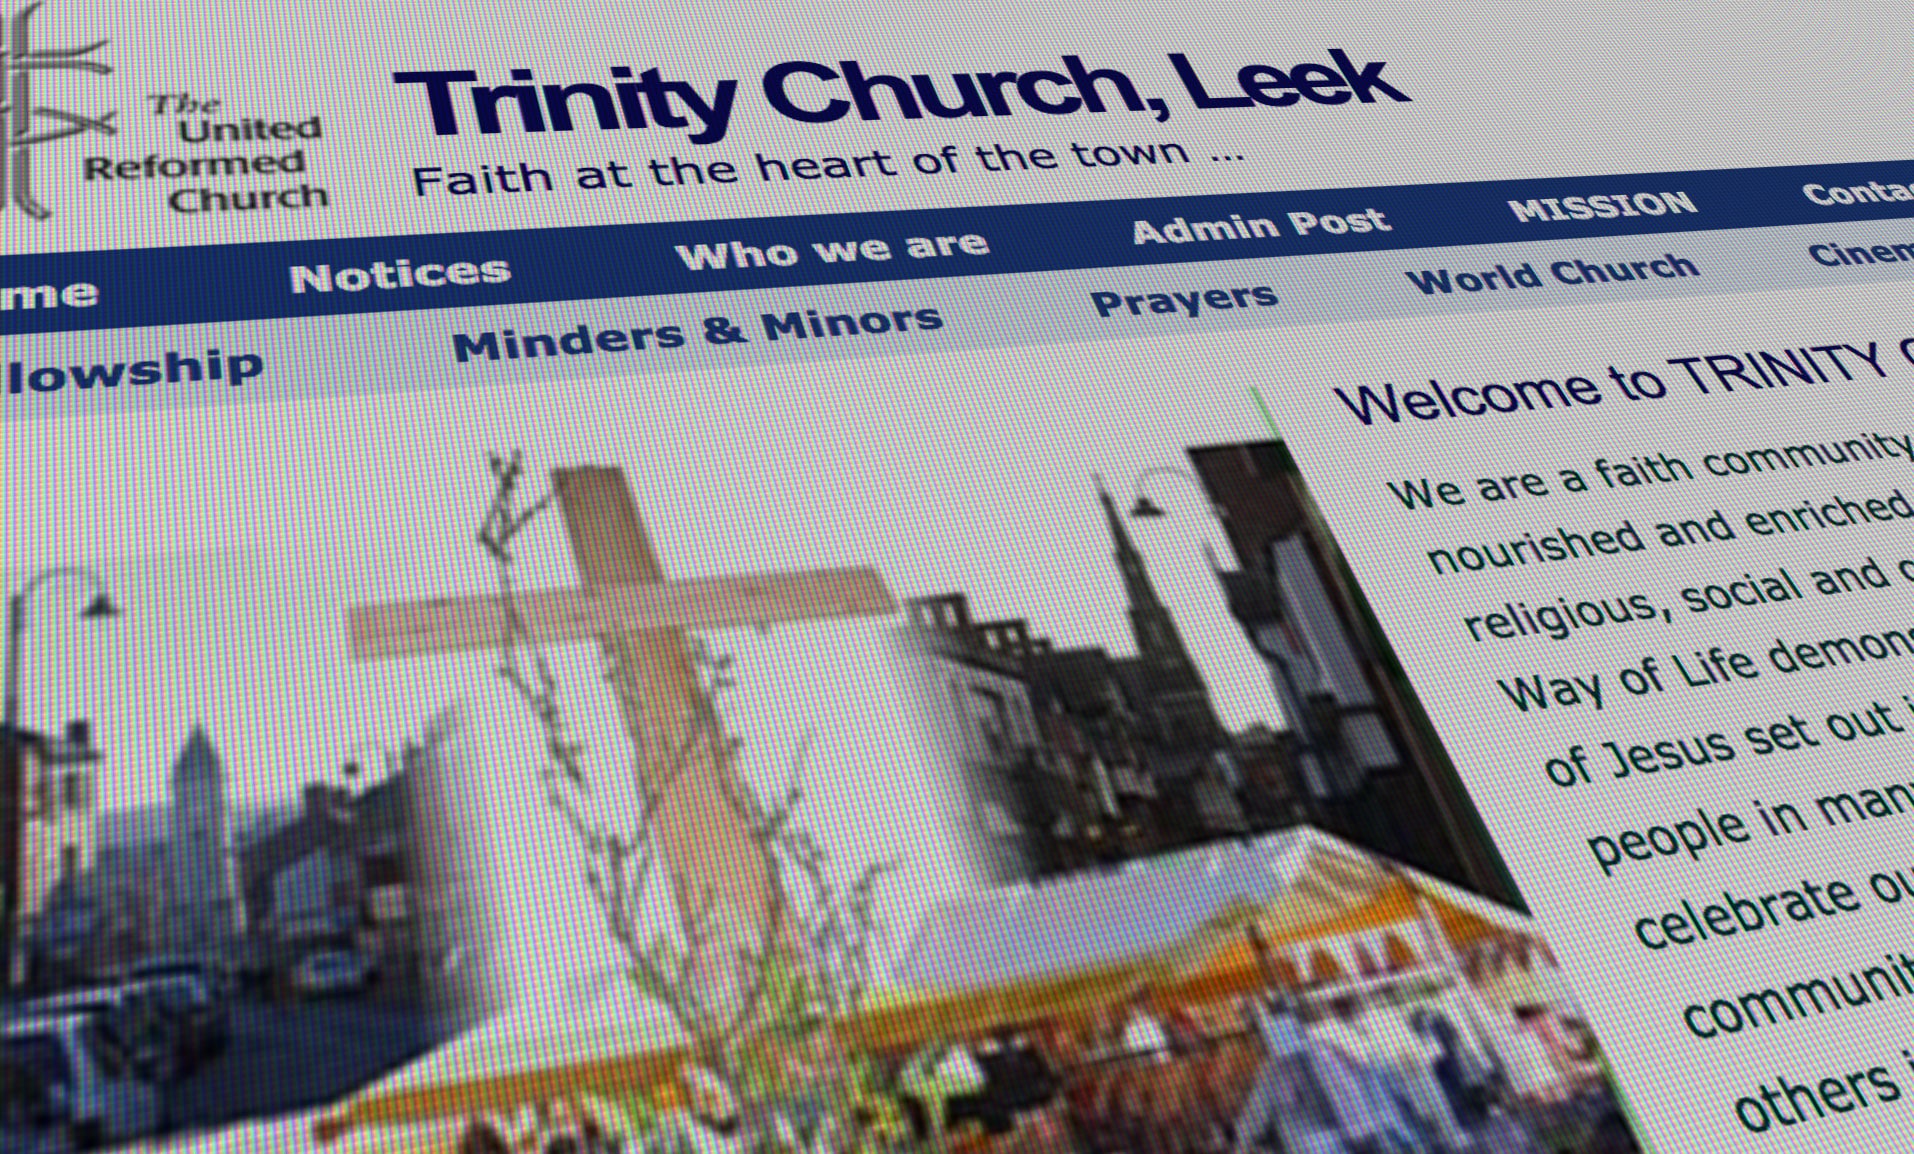 Featured image for “Trinity Church, Leek”